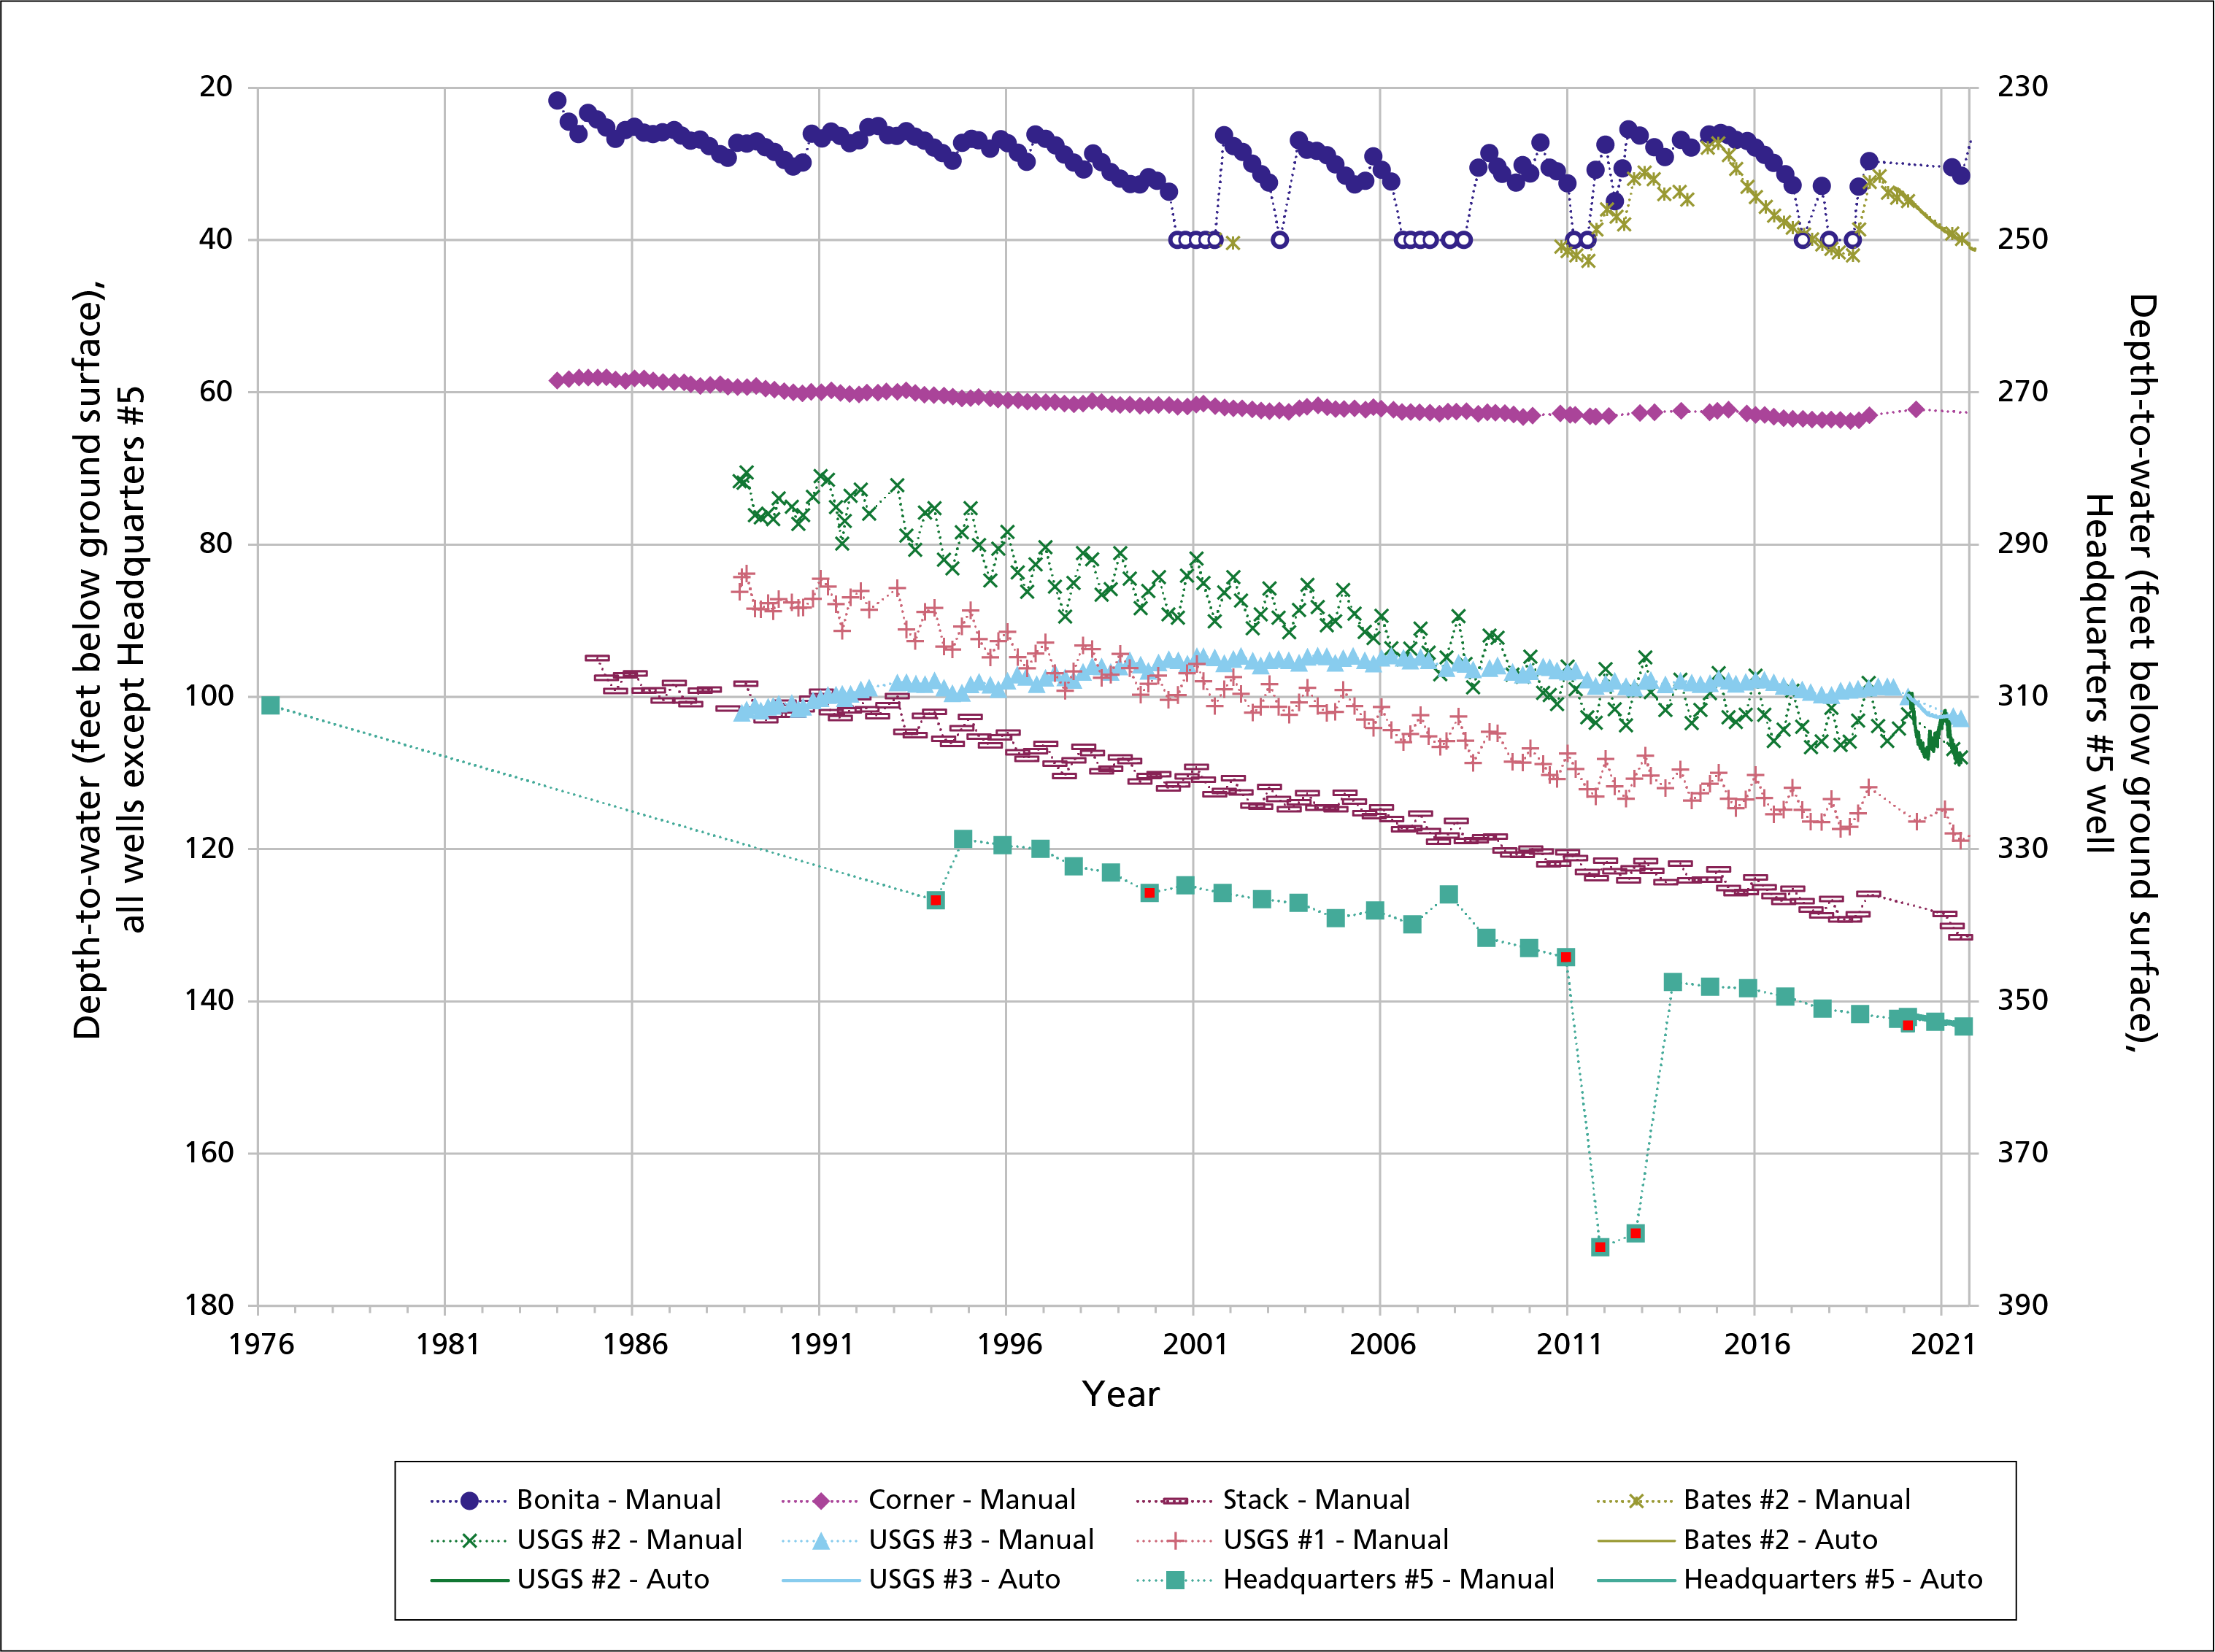 Line graph showing depth-to-water levels for eight wells from 1976 to 2021. Several wells show declines over time.